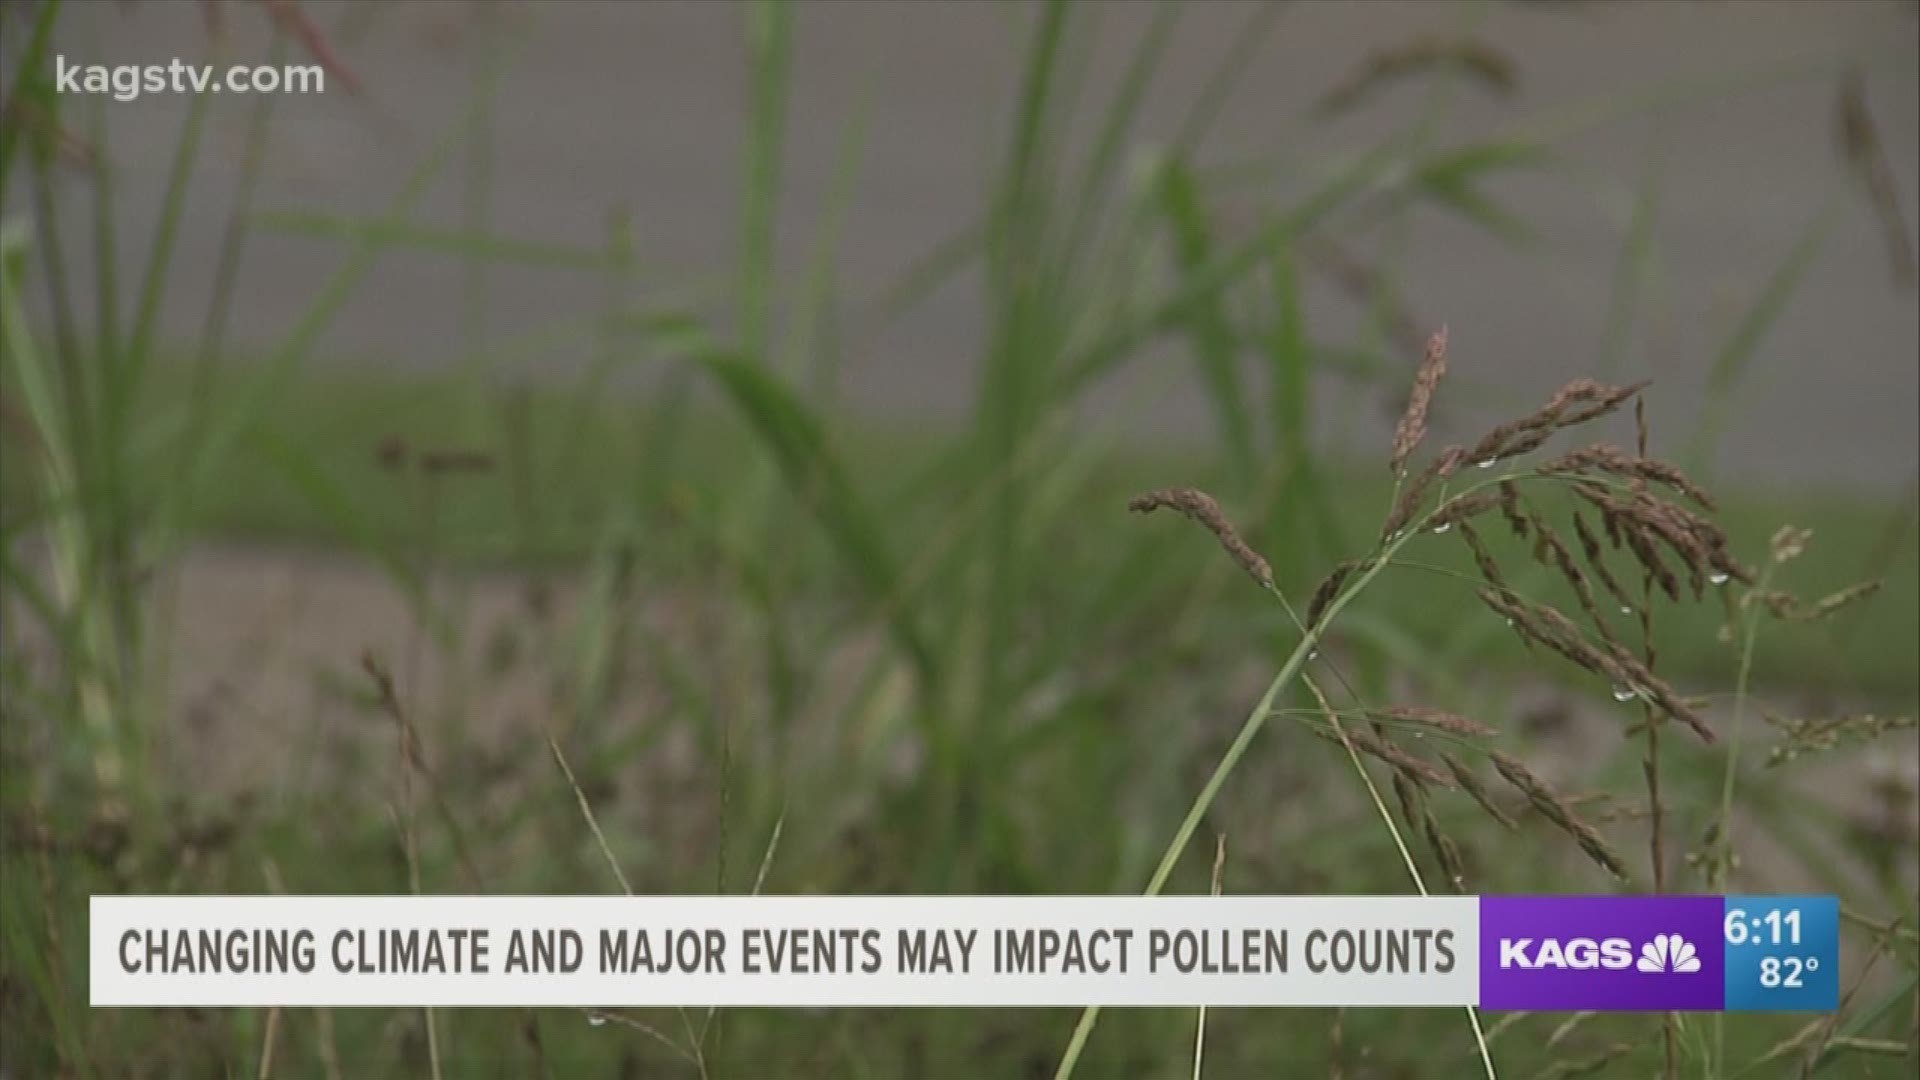 Hurricane Harvey and the subsequent flooding may have subsided months ago but it continues to devastate many allergy sufferers across Texas during the Fall and Spring allergy seasons.